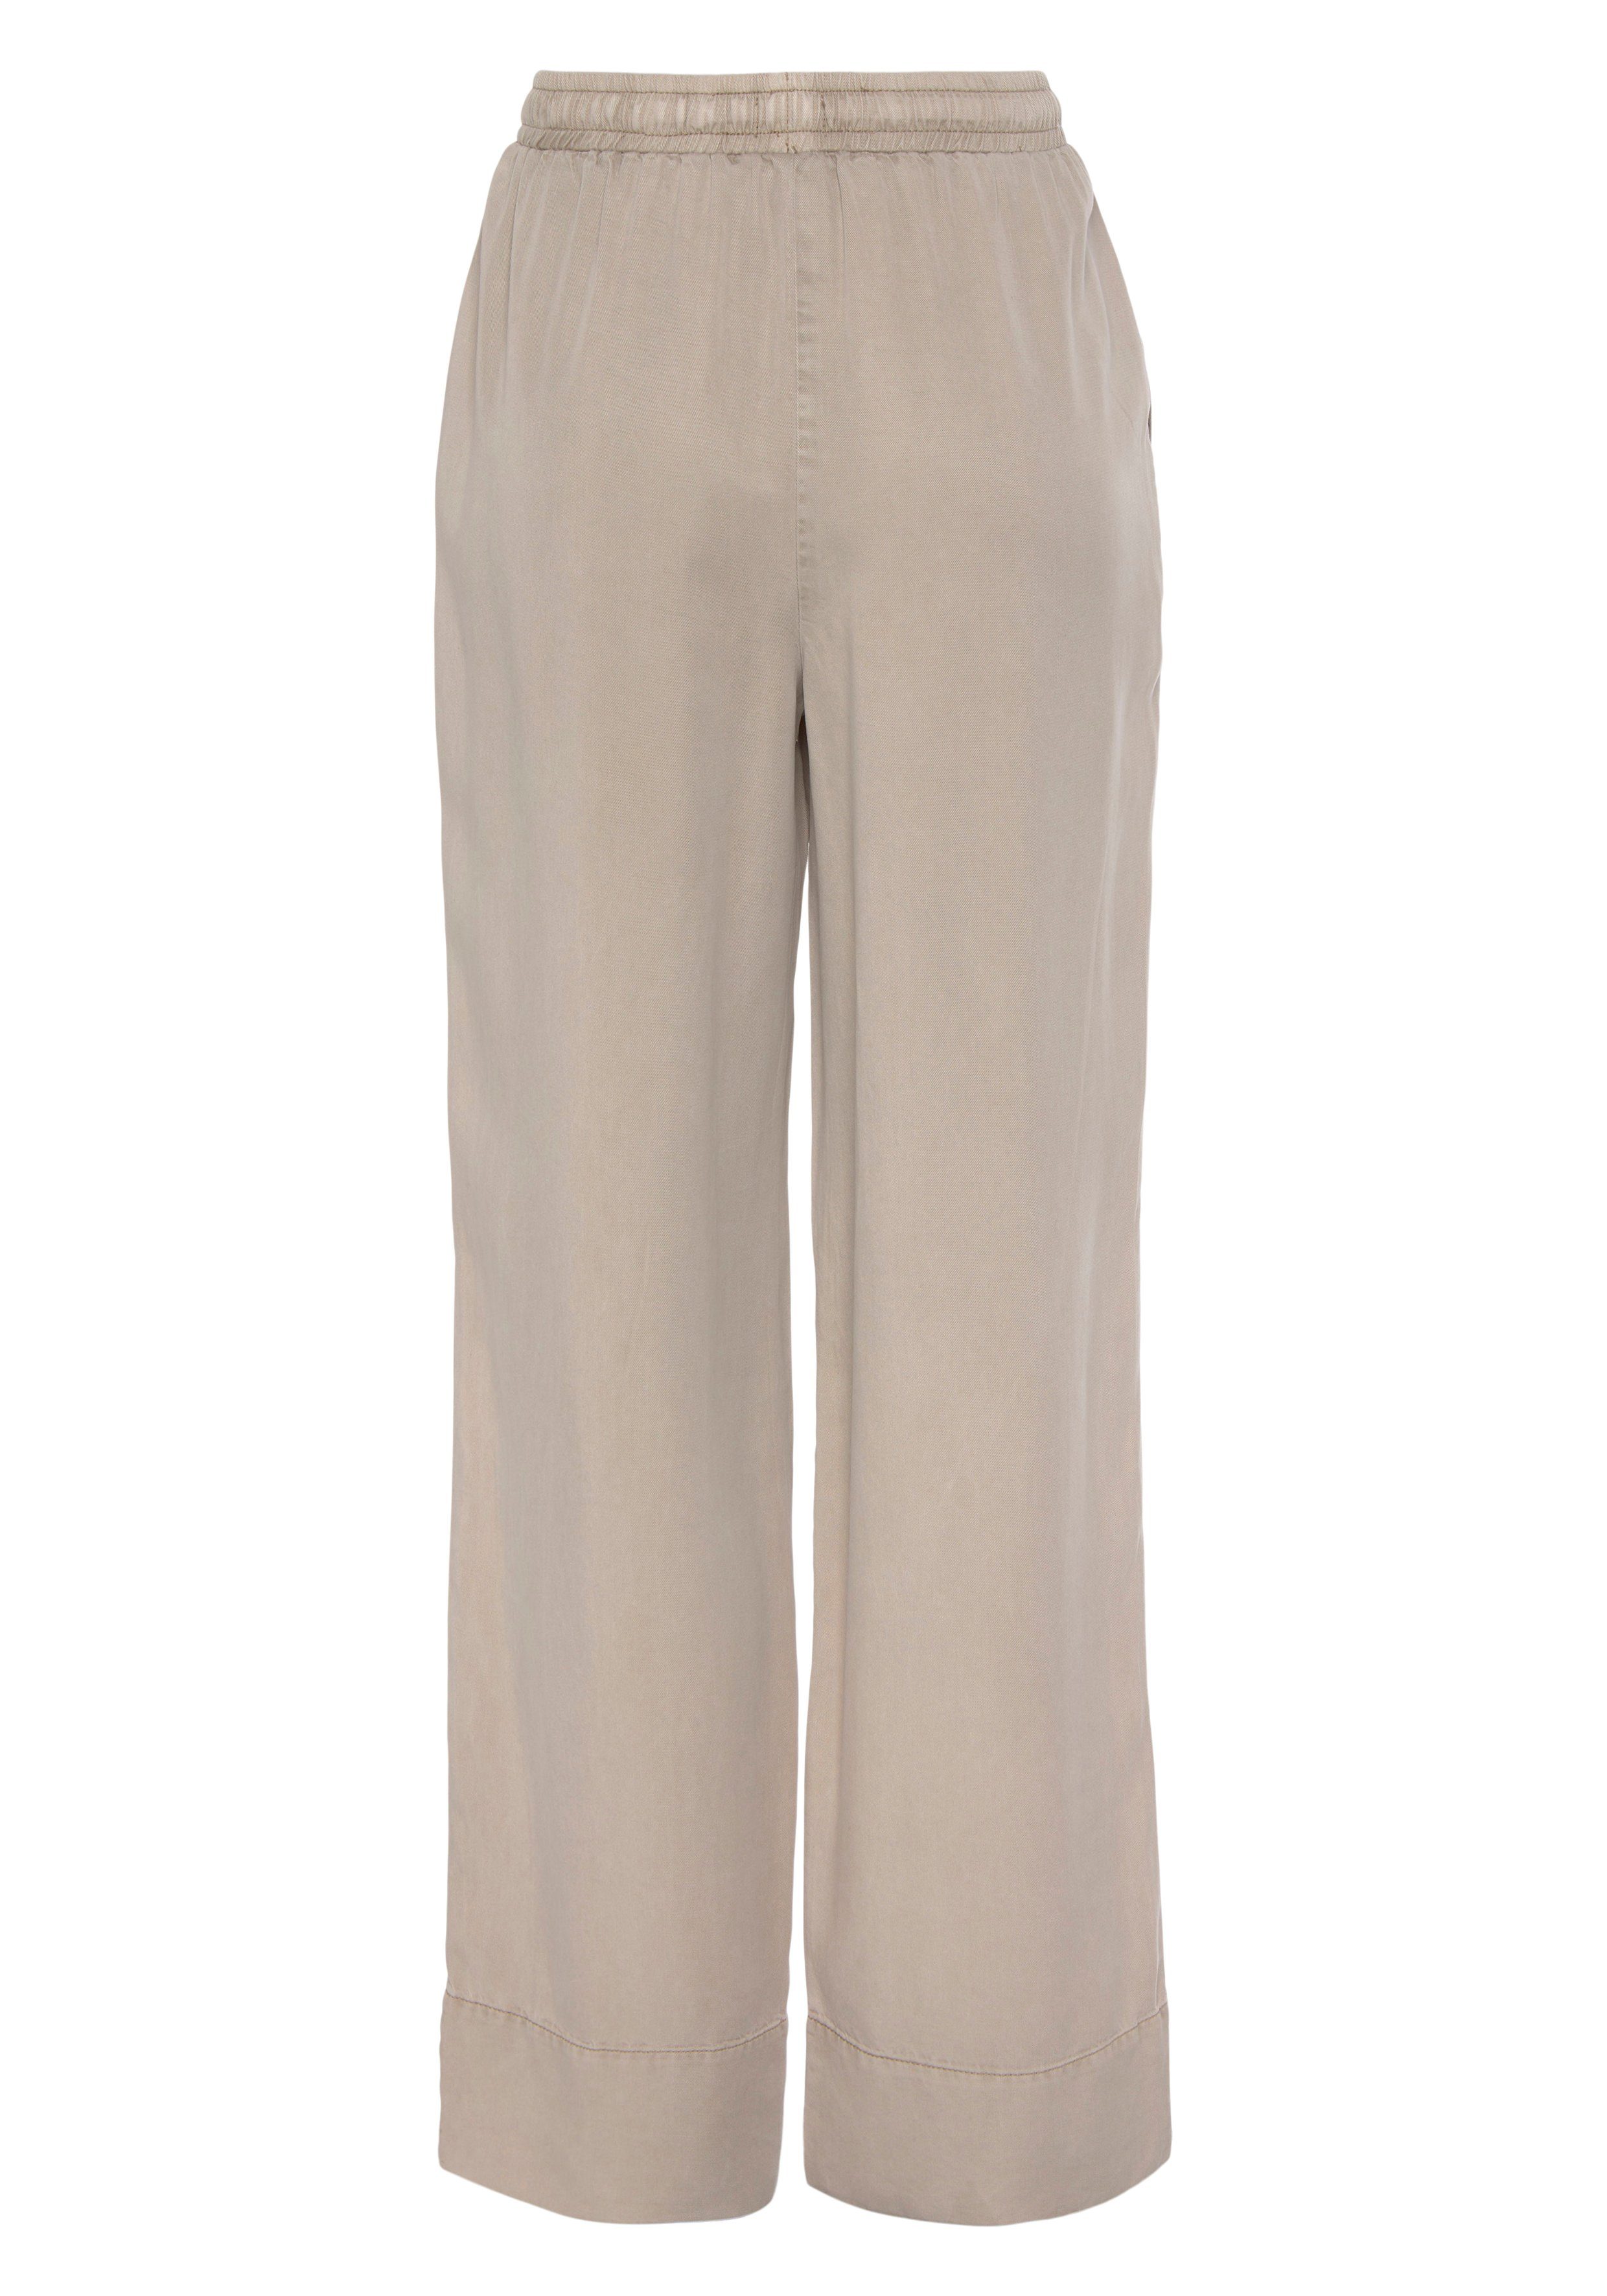 Marlene-Hose CIRCULAR beige products COLLECTION OTTO